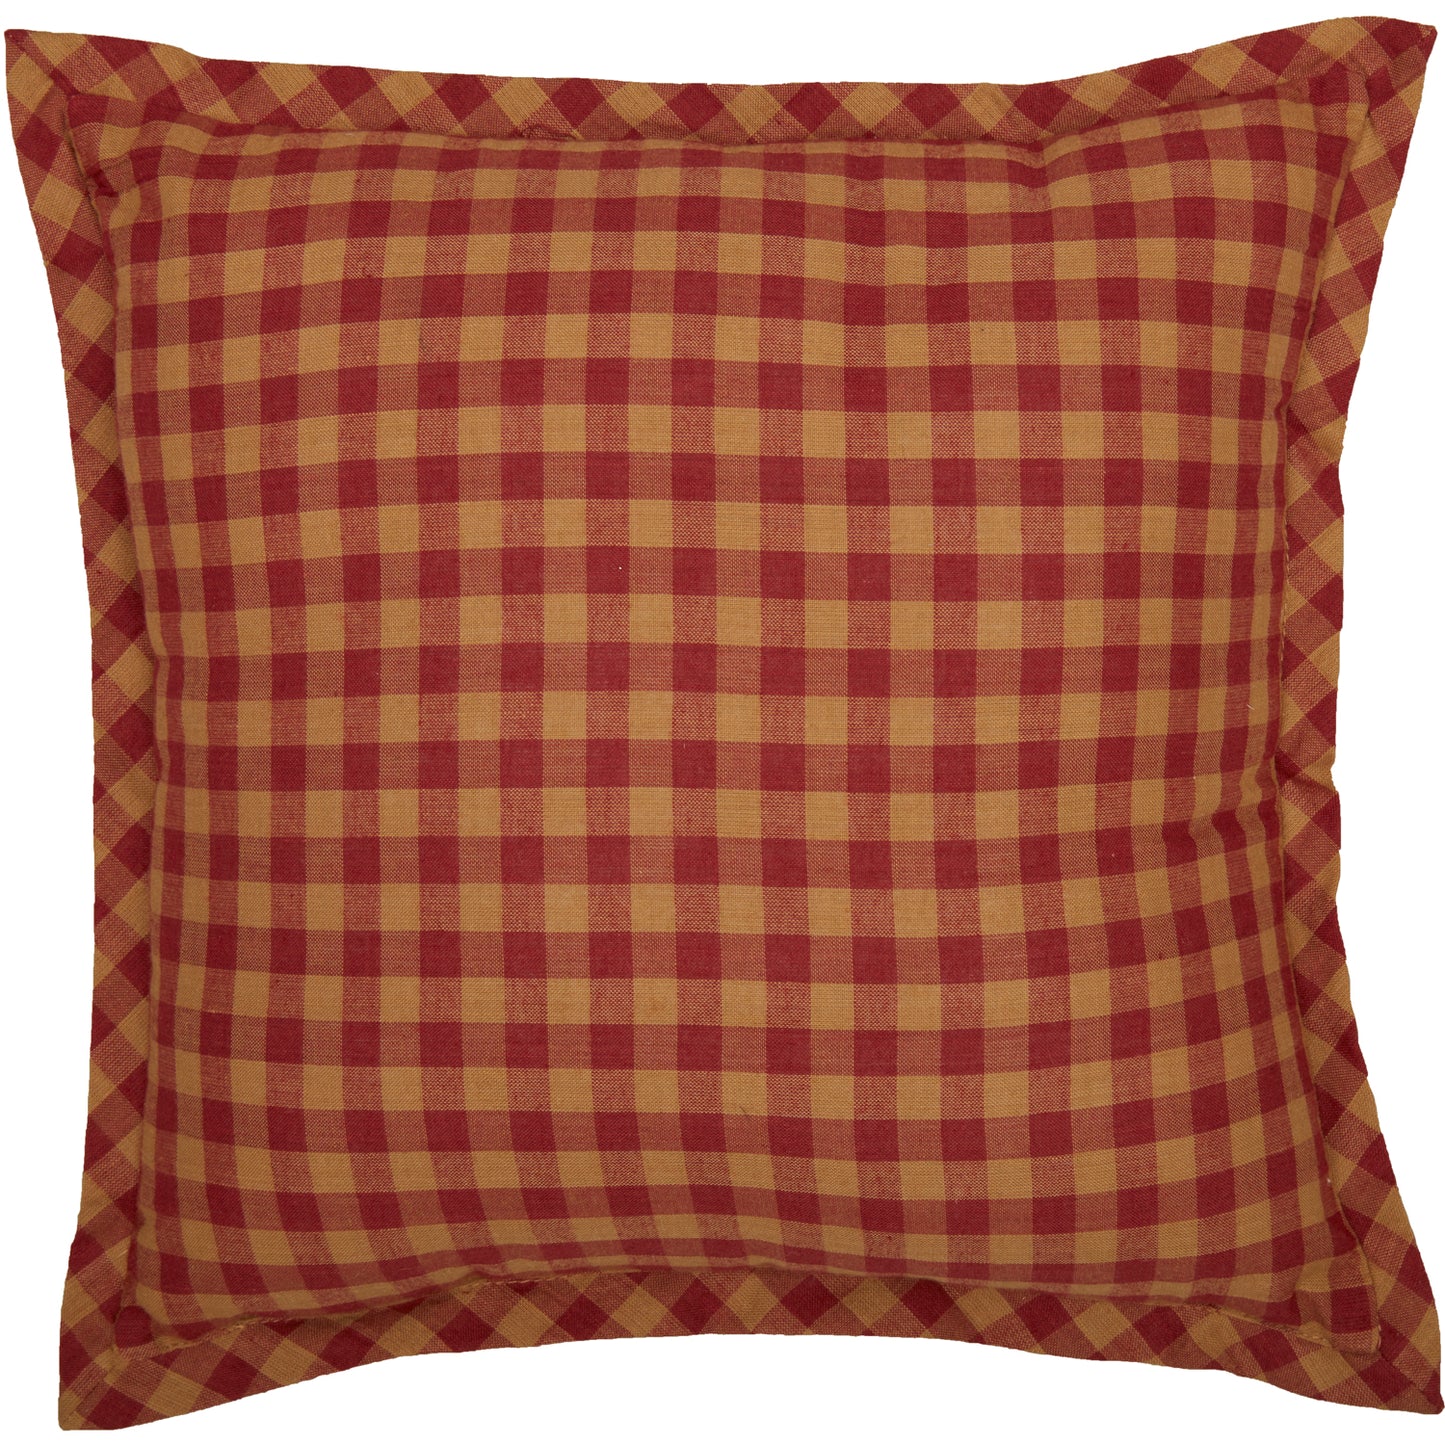 56741-Ninepatch-Star-Home-Pillow-12x12-image-5